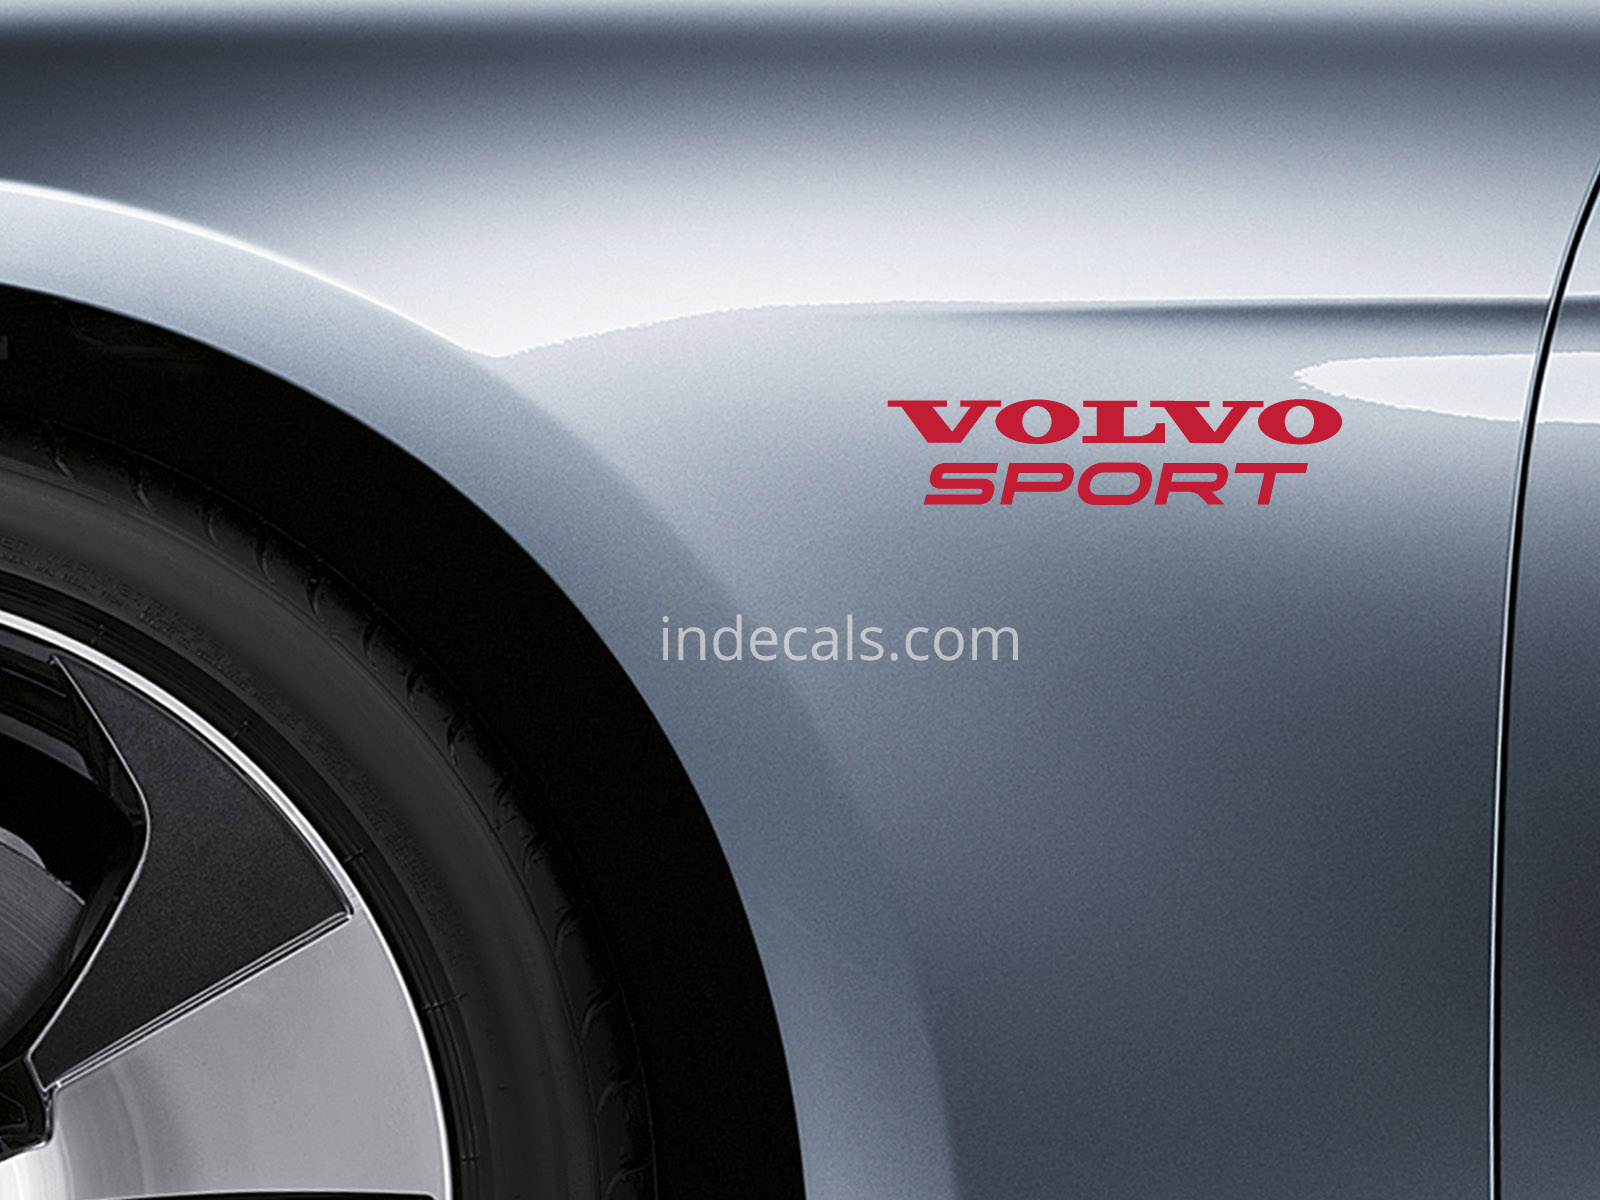 2 x Volvo Sports stickers for Wings - Red